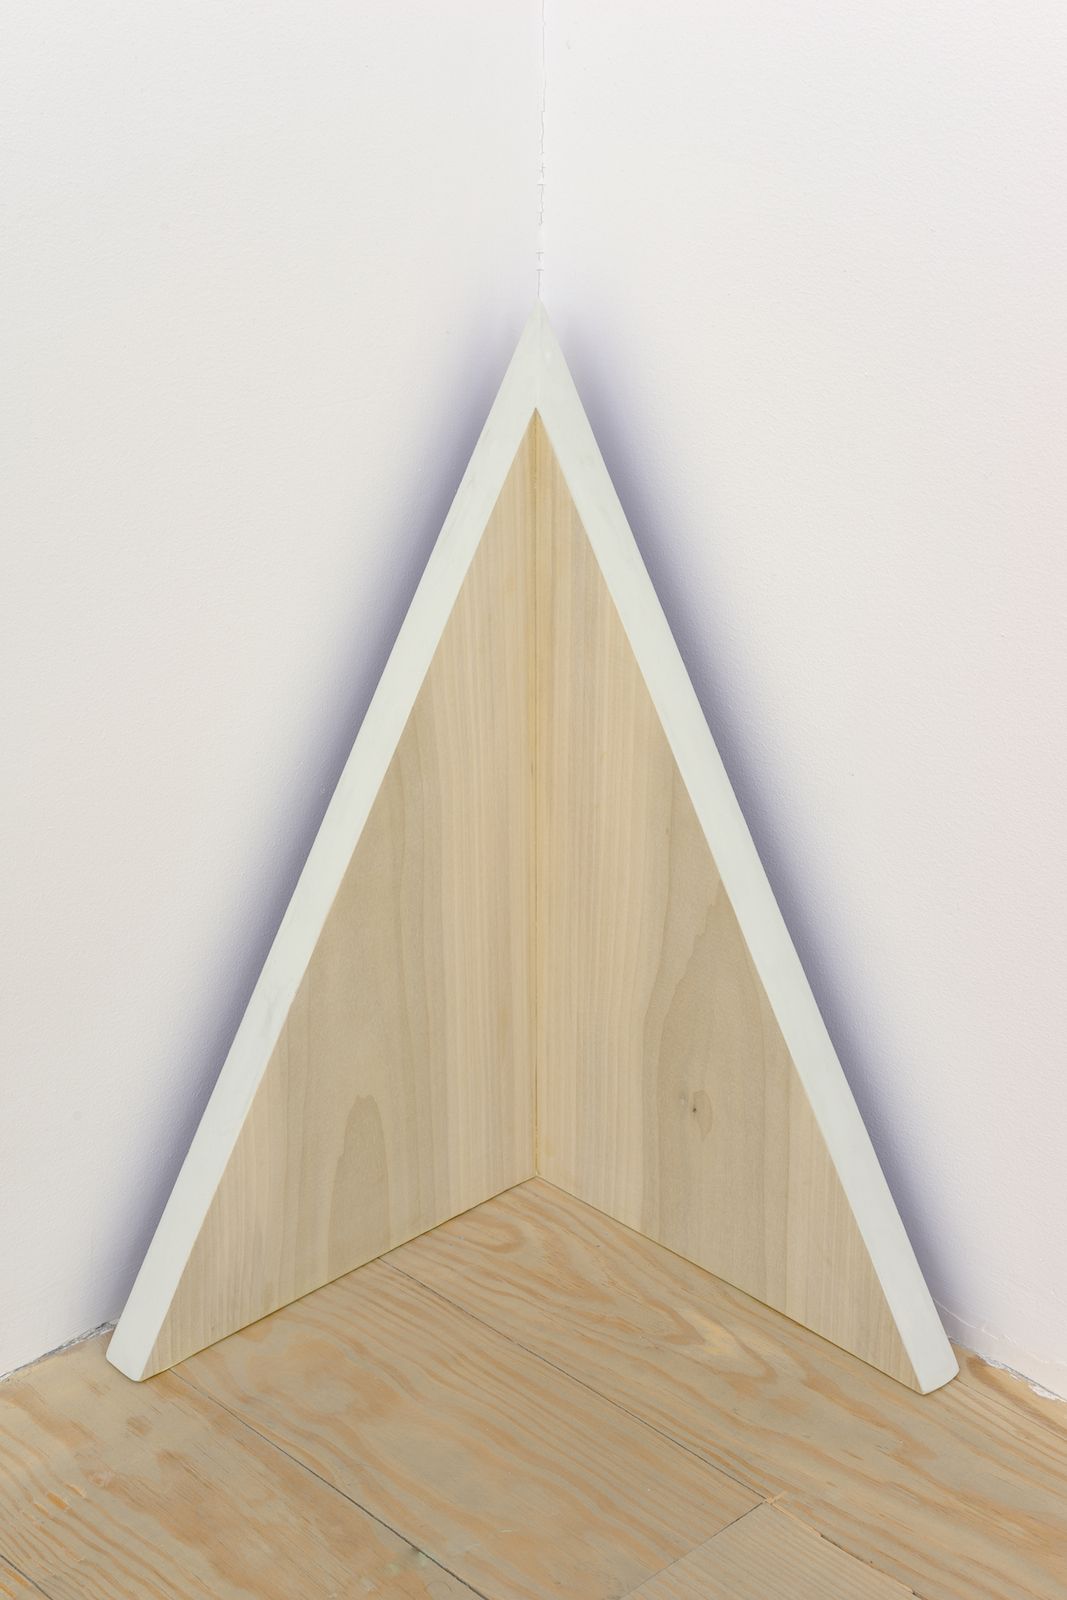 Gordon Hall, Set (V), 2014, acrylic and pigmented joint compound on wood, 18 3⁄4 × 20 × 1 1⁄4 in.